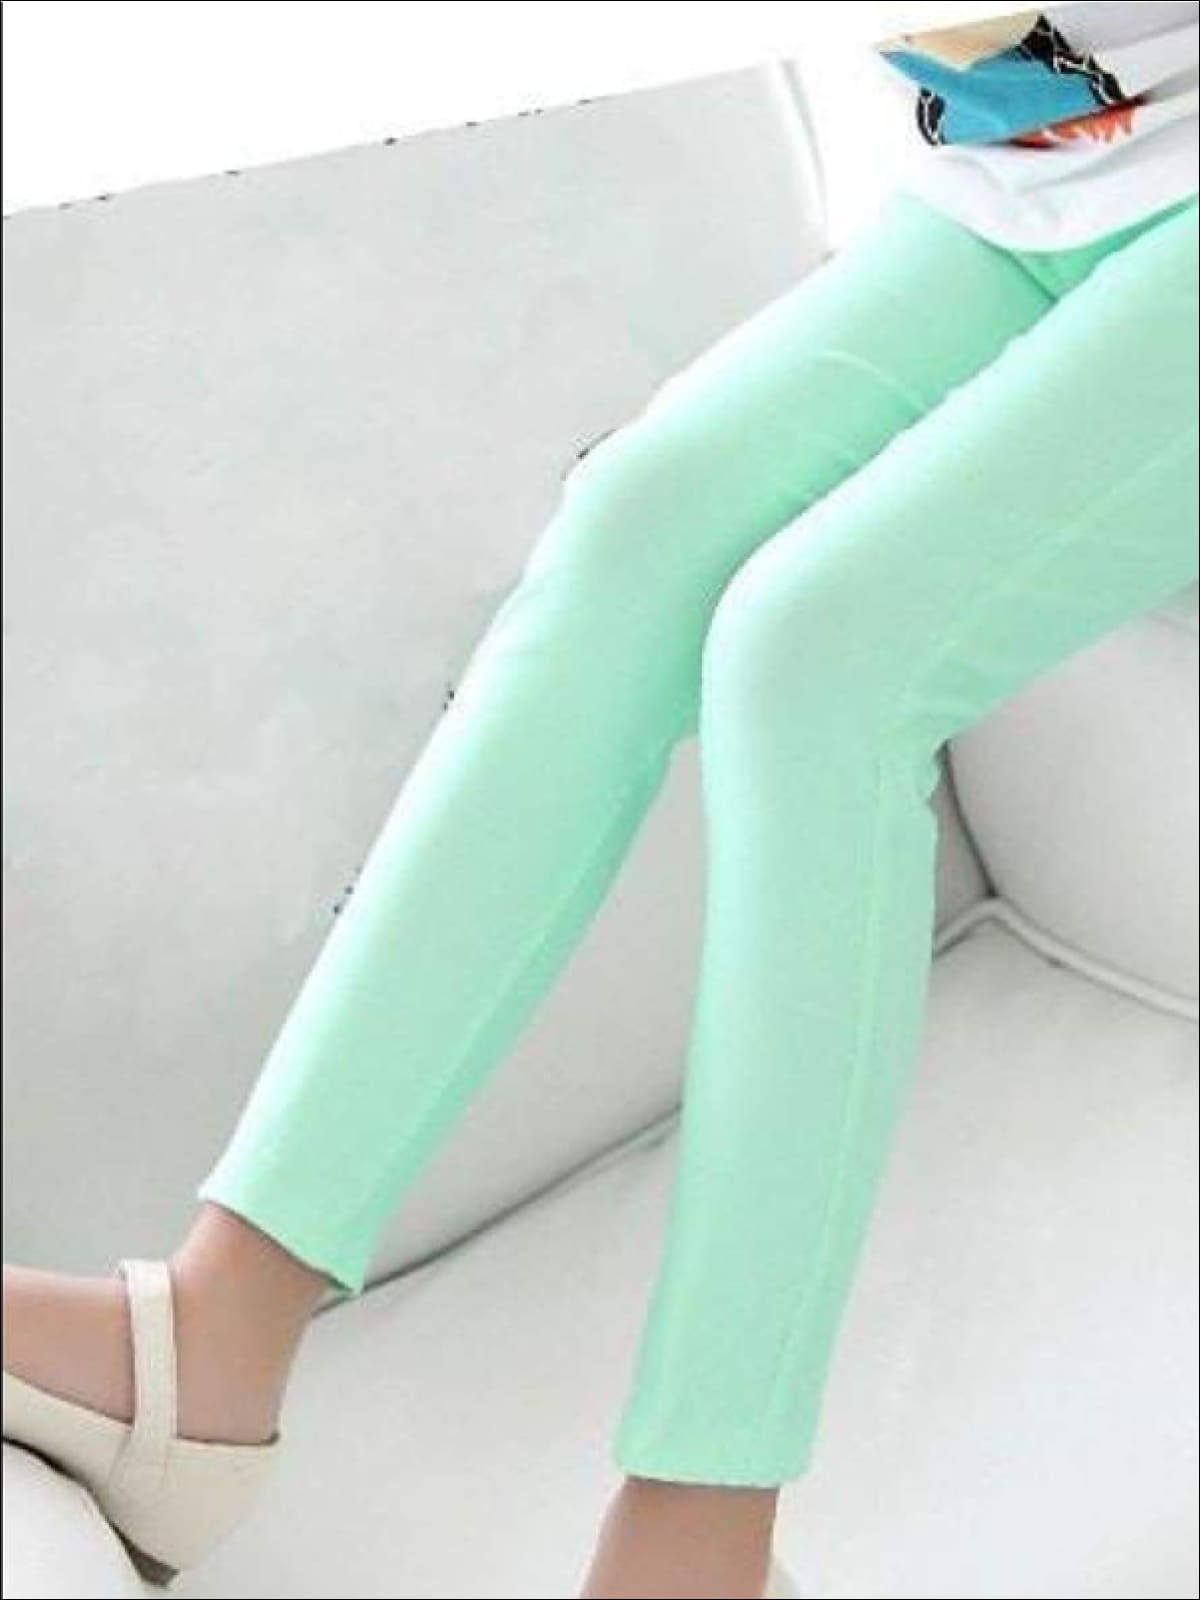 Crazy good AE sale on my FAVE affordable leggings + jeans! - Mint Arrow